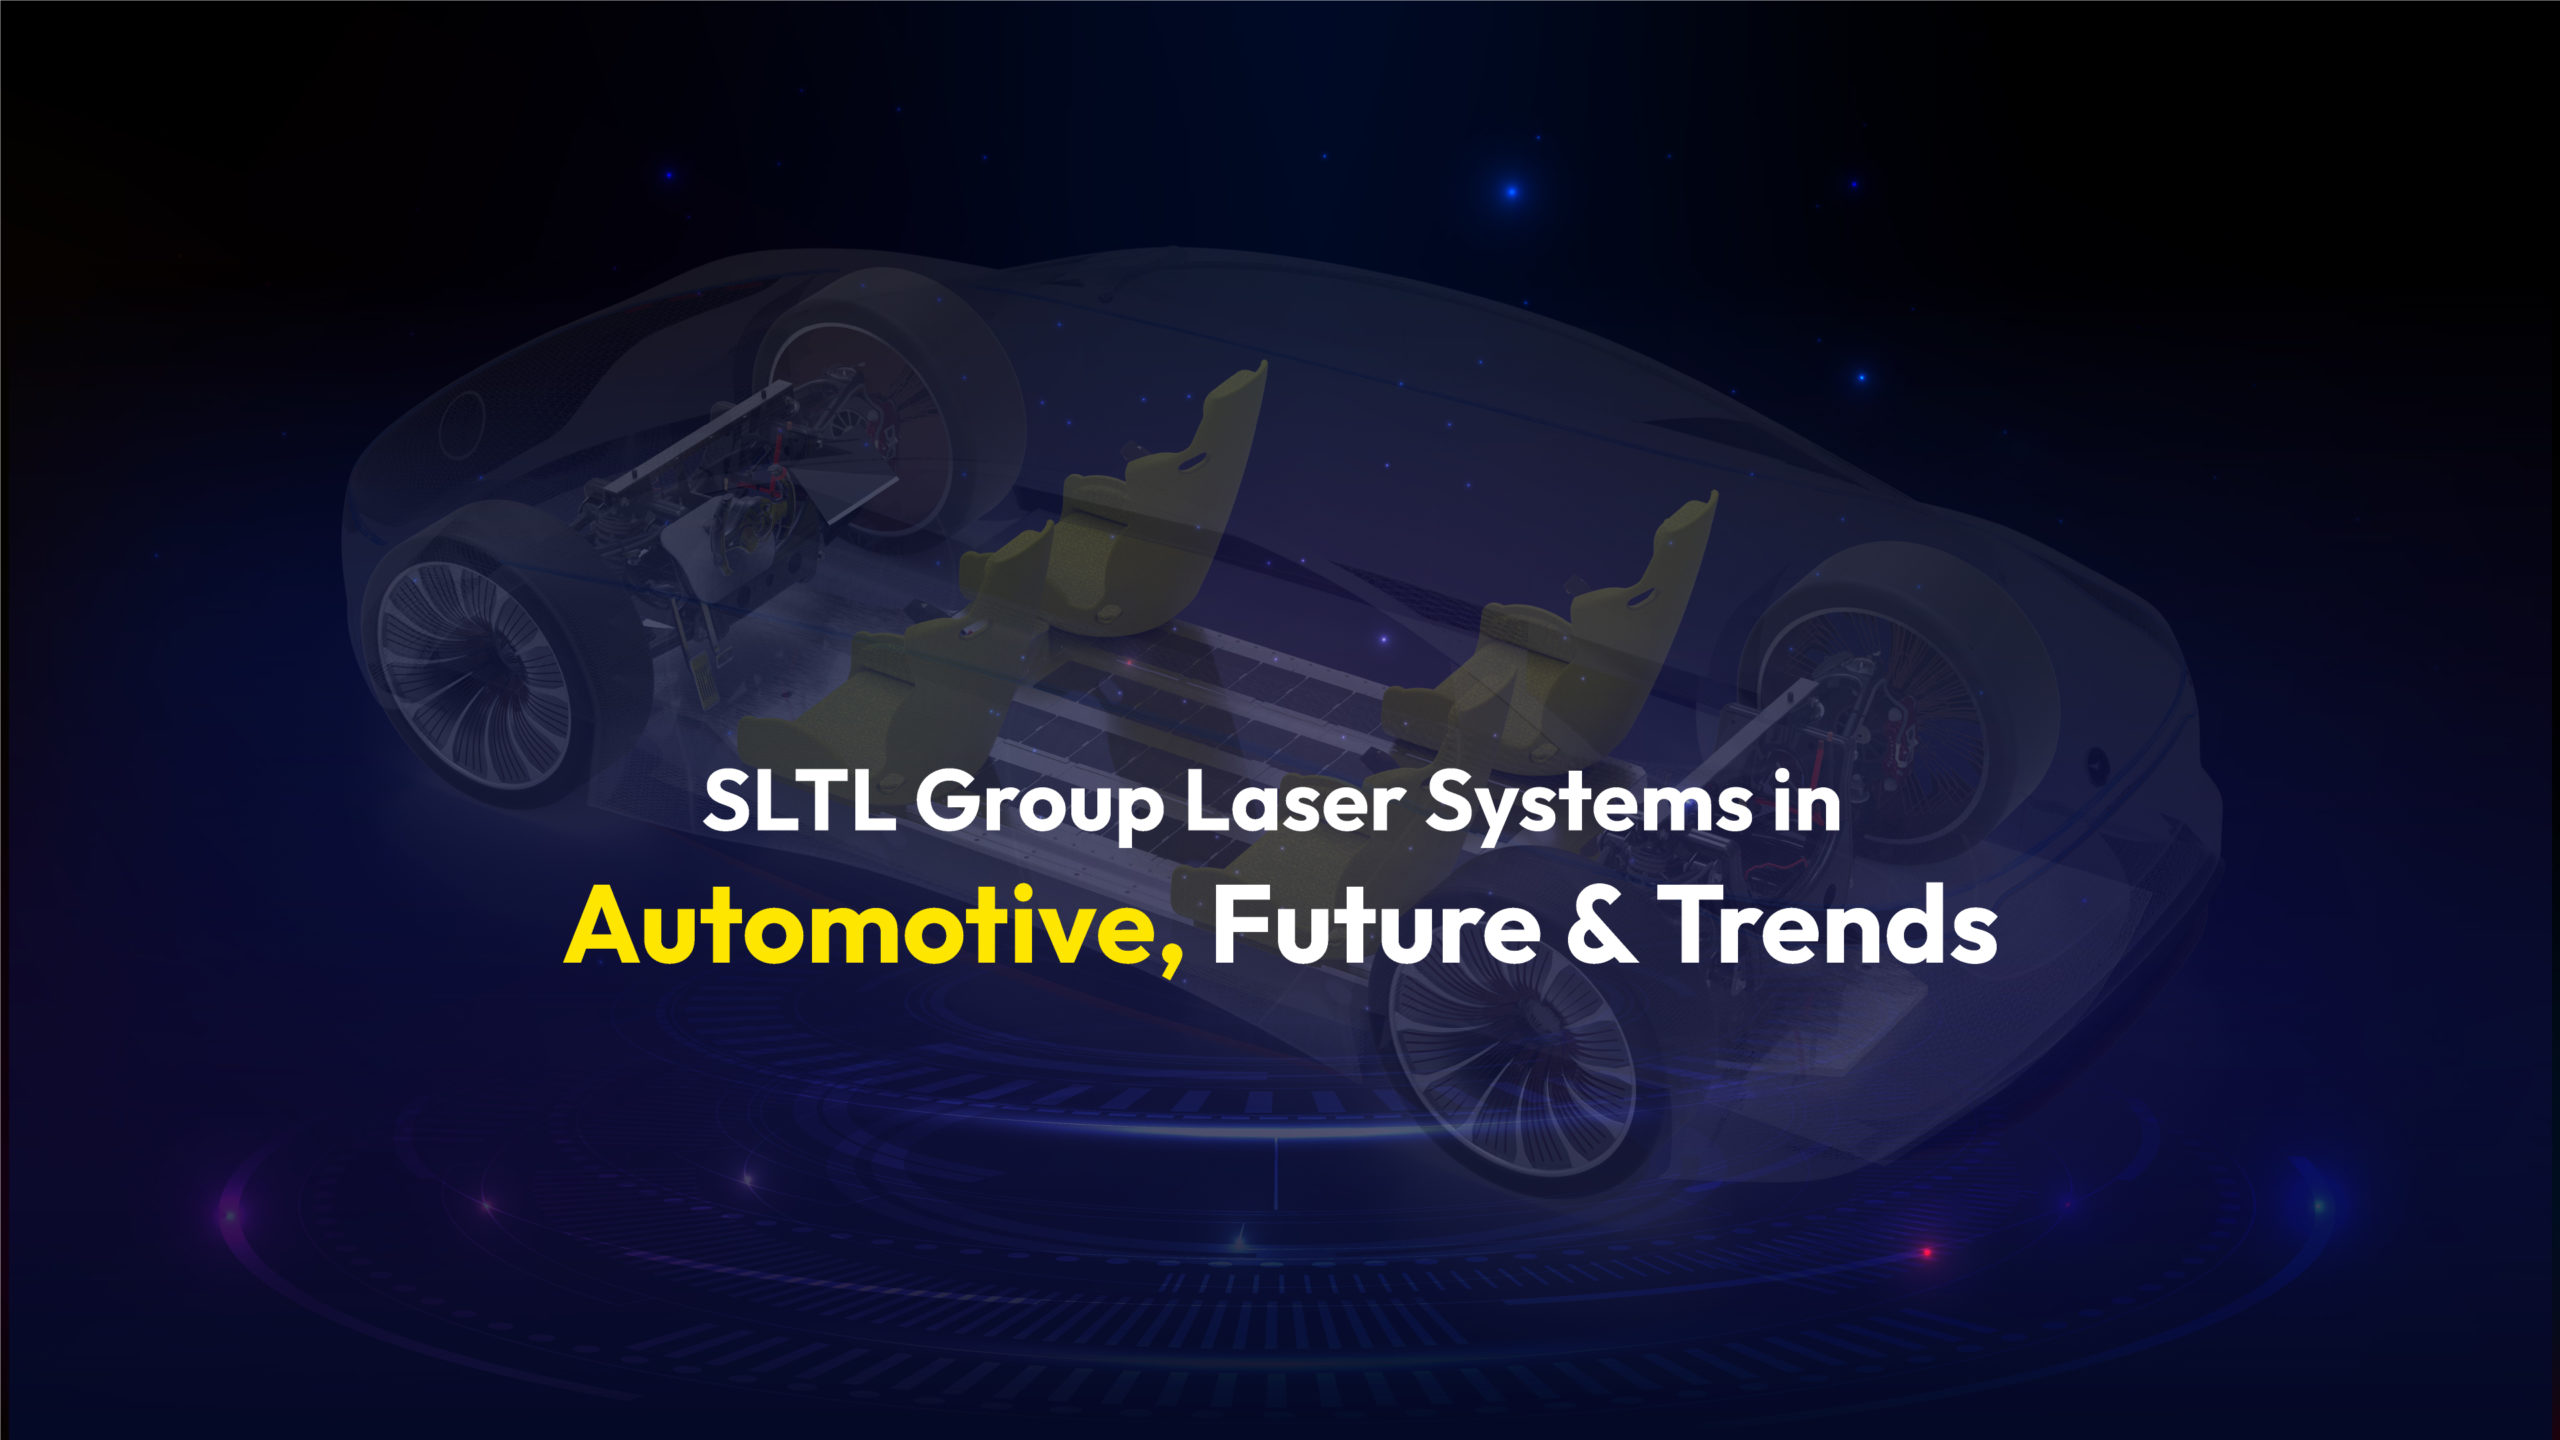 Building an Ecosystem with Lasers Thriving the Automotive and Automobiles in a Sustainable Way